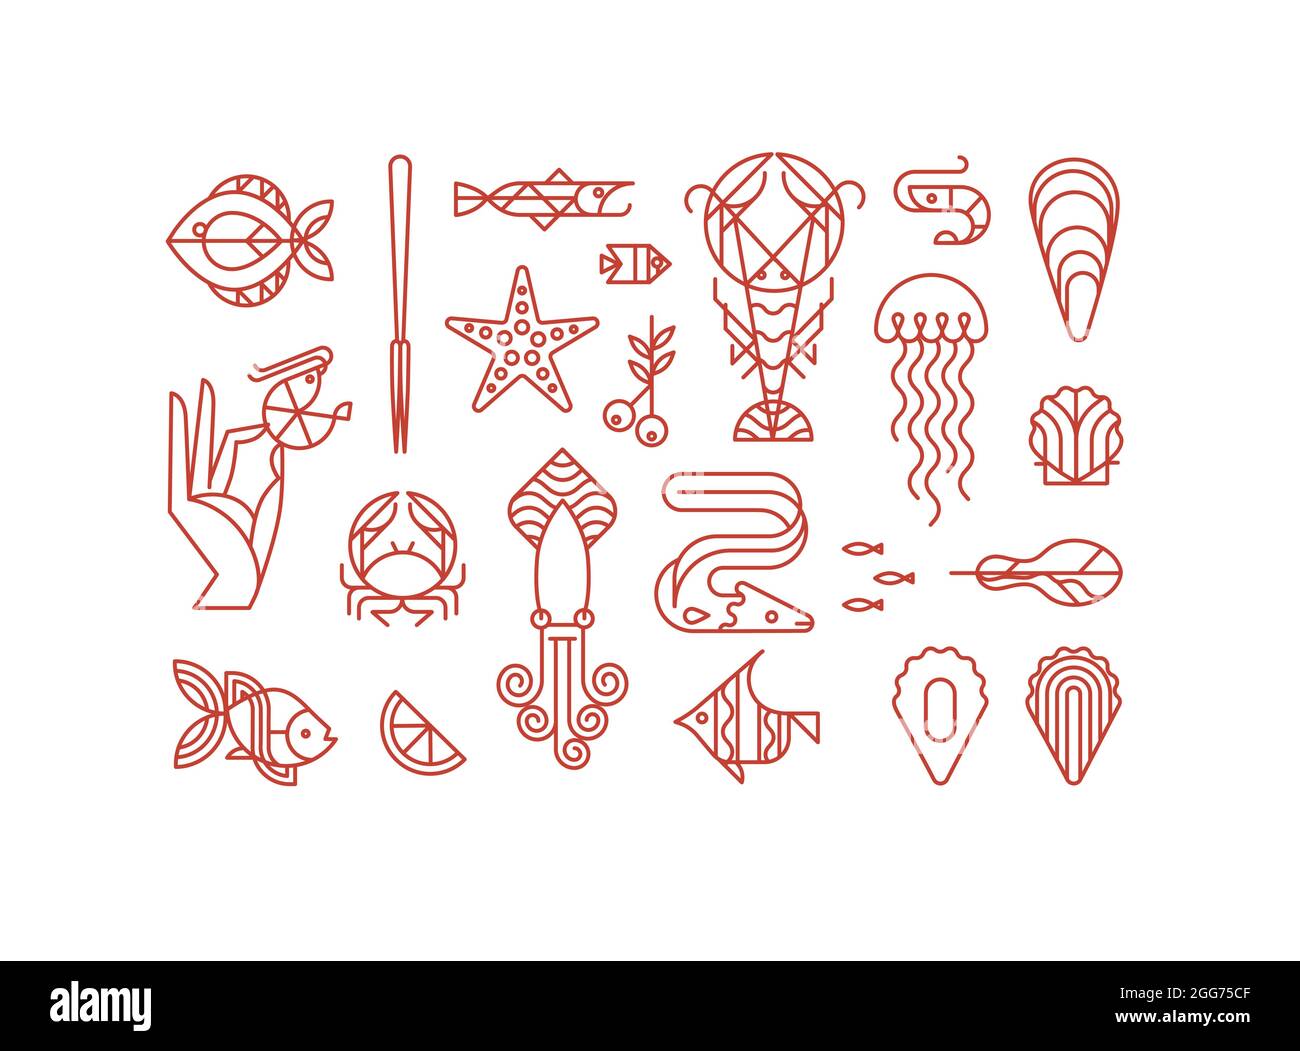 Set of creative modern art deco seafood signs in flat line style drawing on white background. Stock Vector